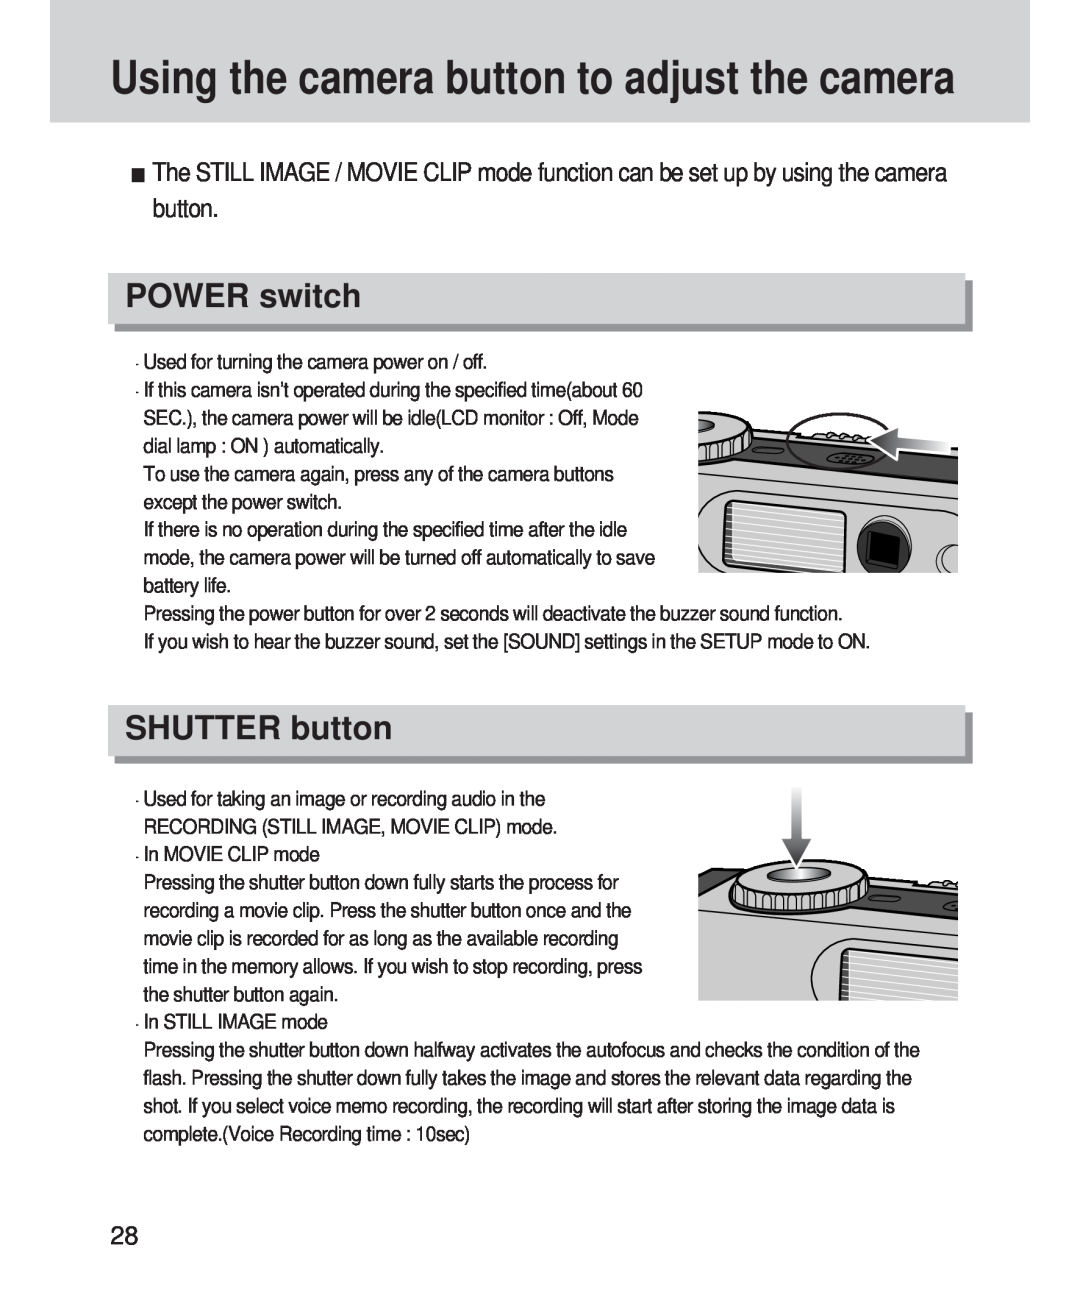 Samsung 420 manual Using the camera button to adjust the camera, POWER switch, SHUTTER button 